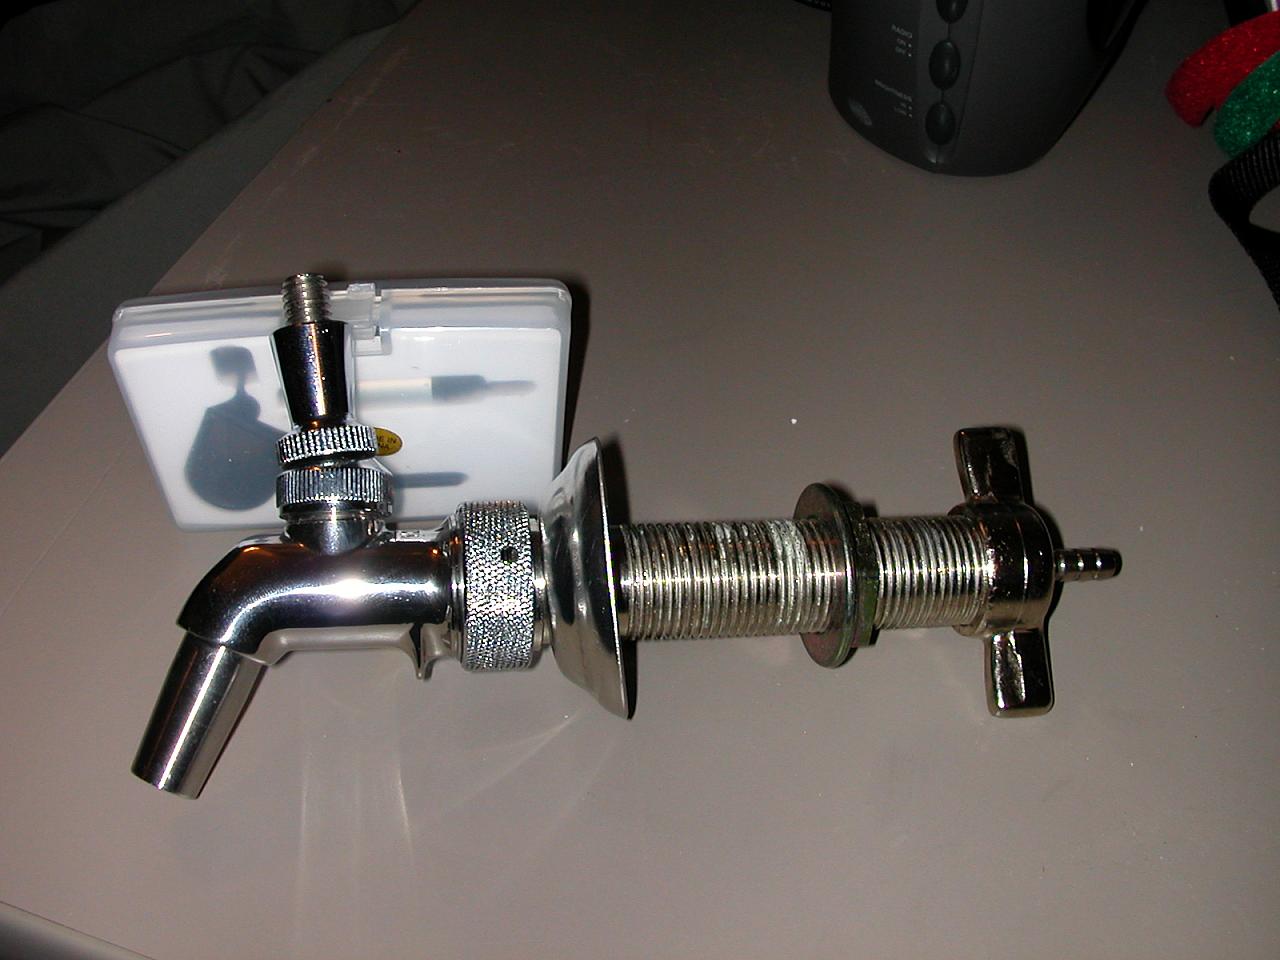 Faucet and shank assembly ready to go through the door.